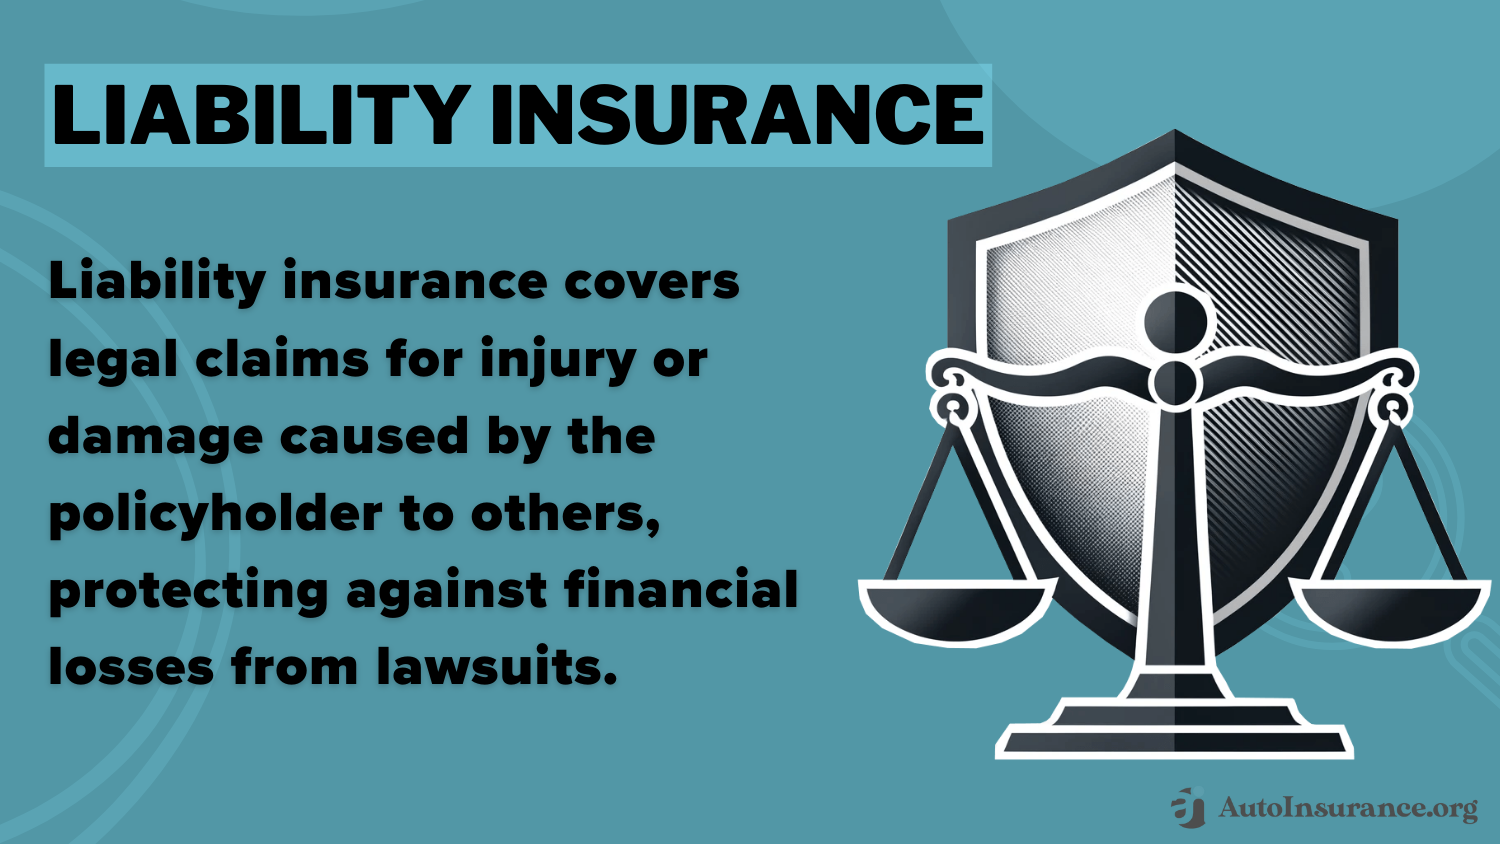 Government Assistance Programs for Low-Income Drivers: Liability Insurance Definition Card